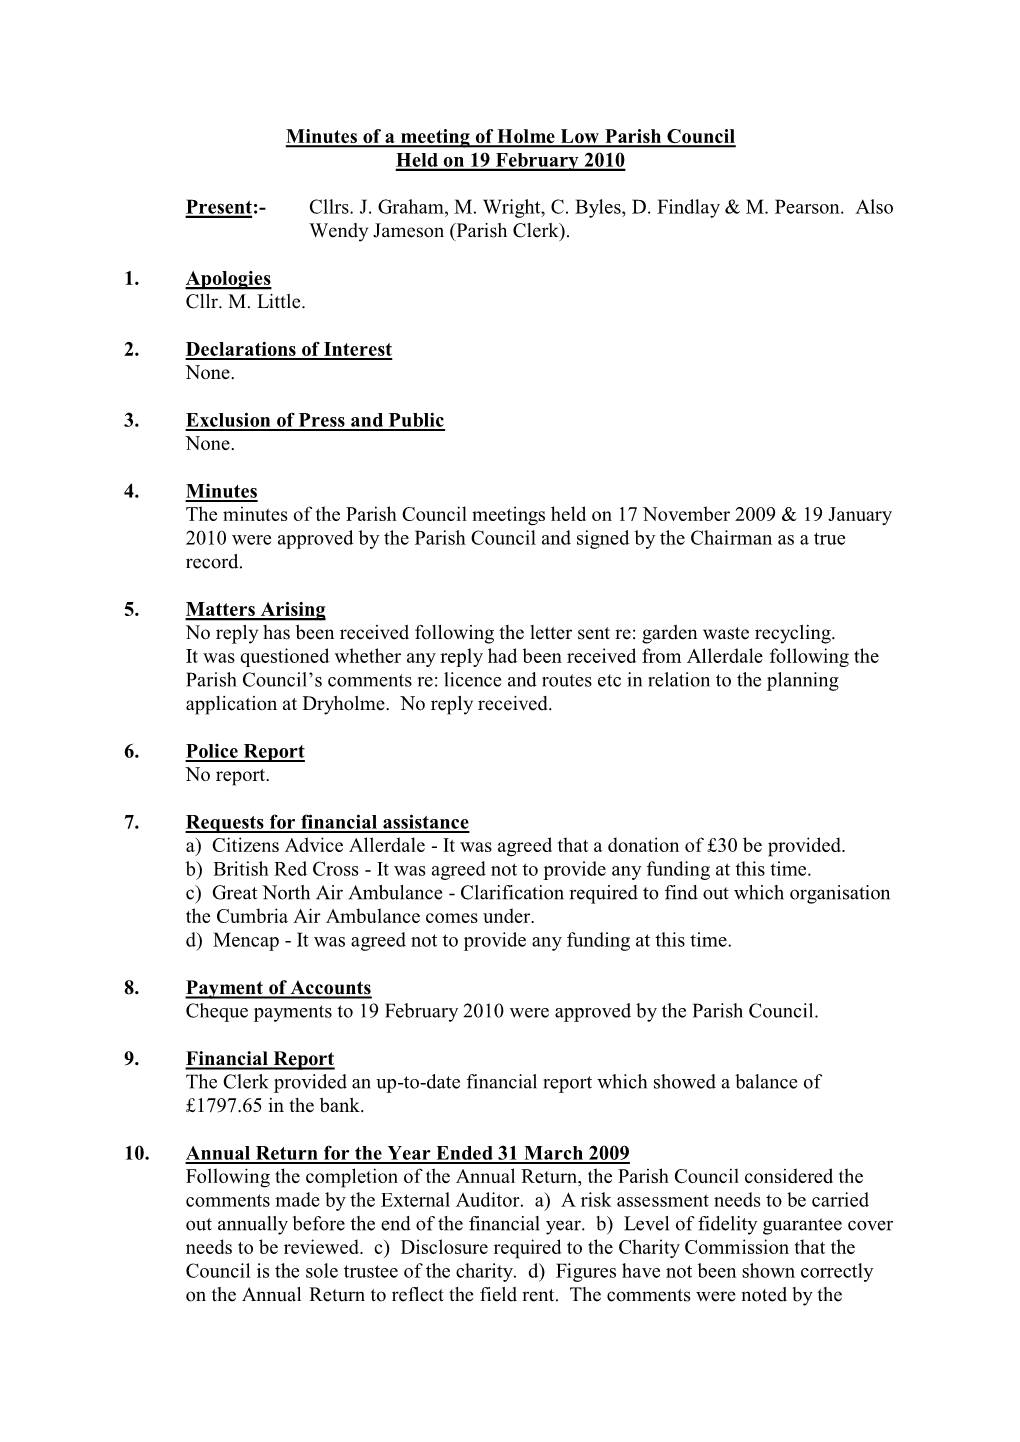 Minutes of a Meeting of Holme Low Parish Council Held on 19 February 2010